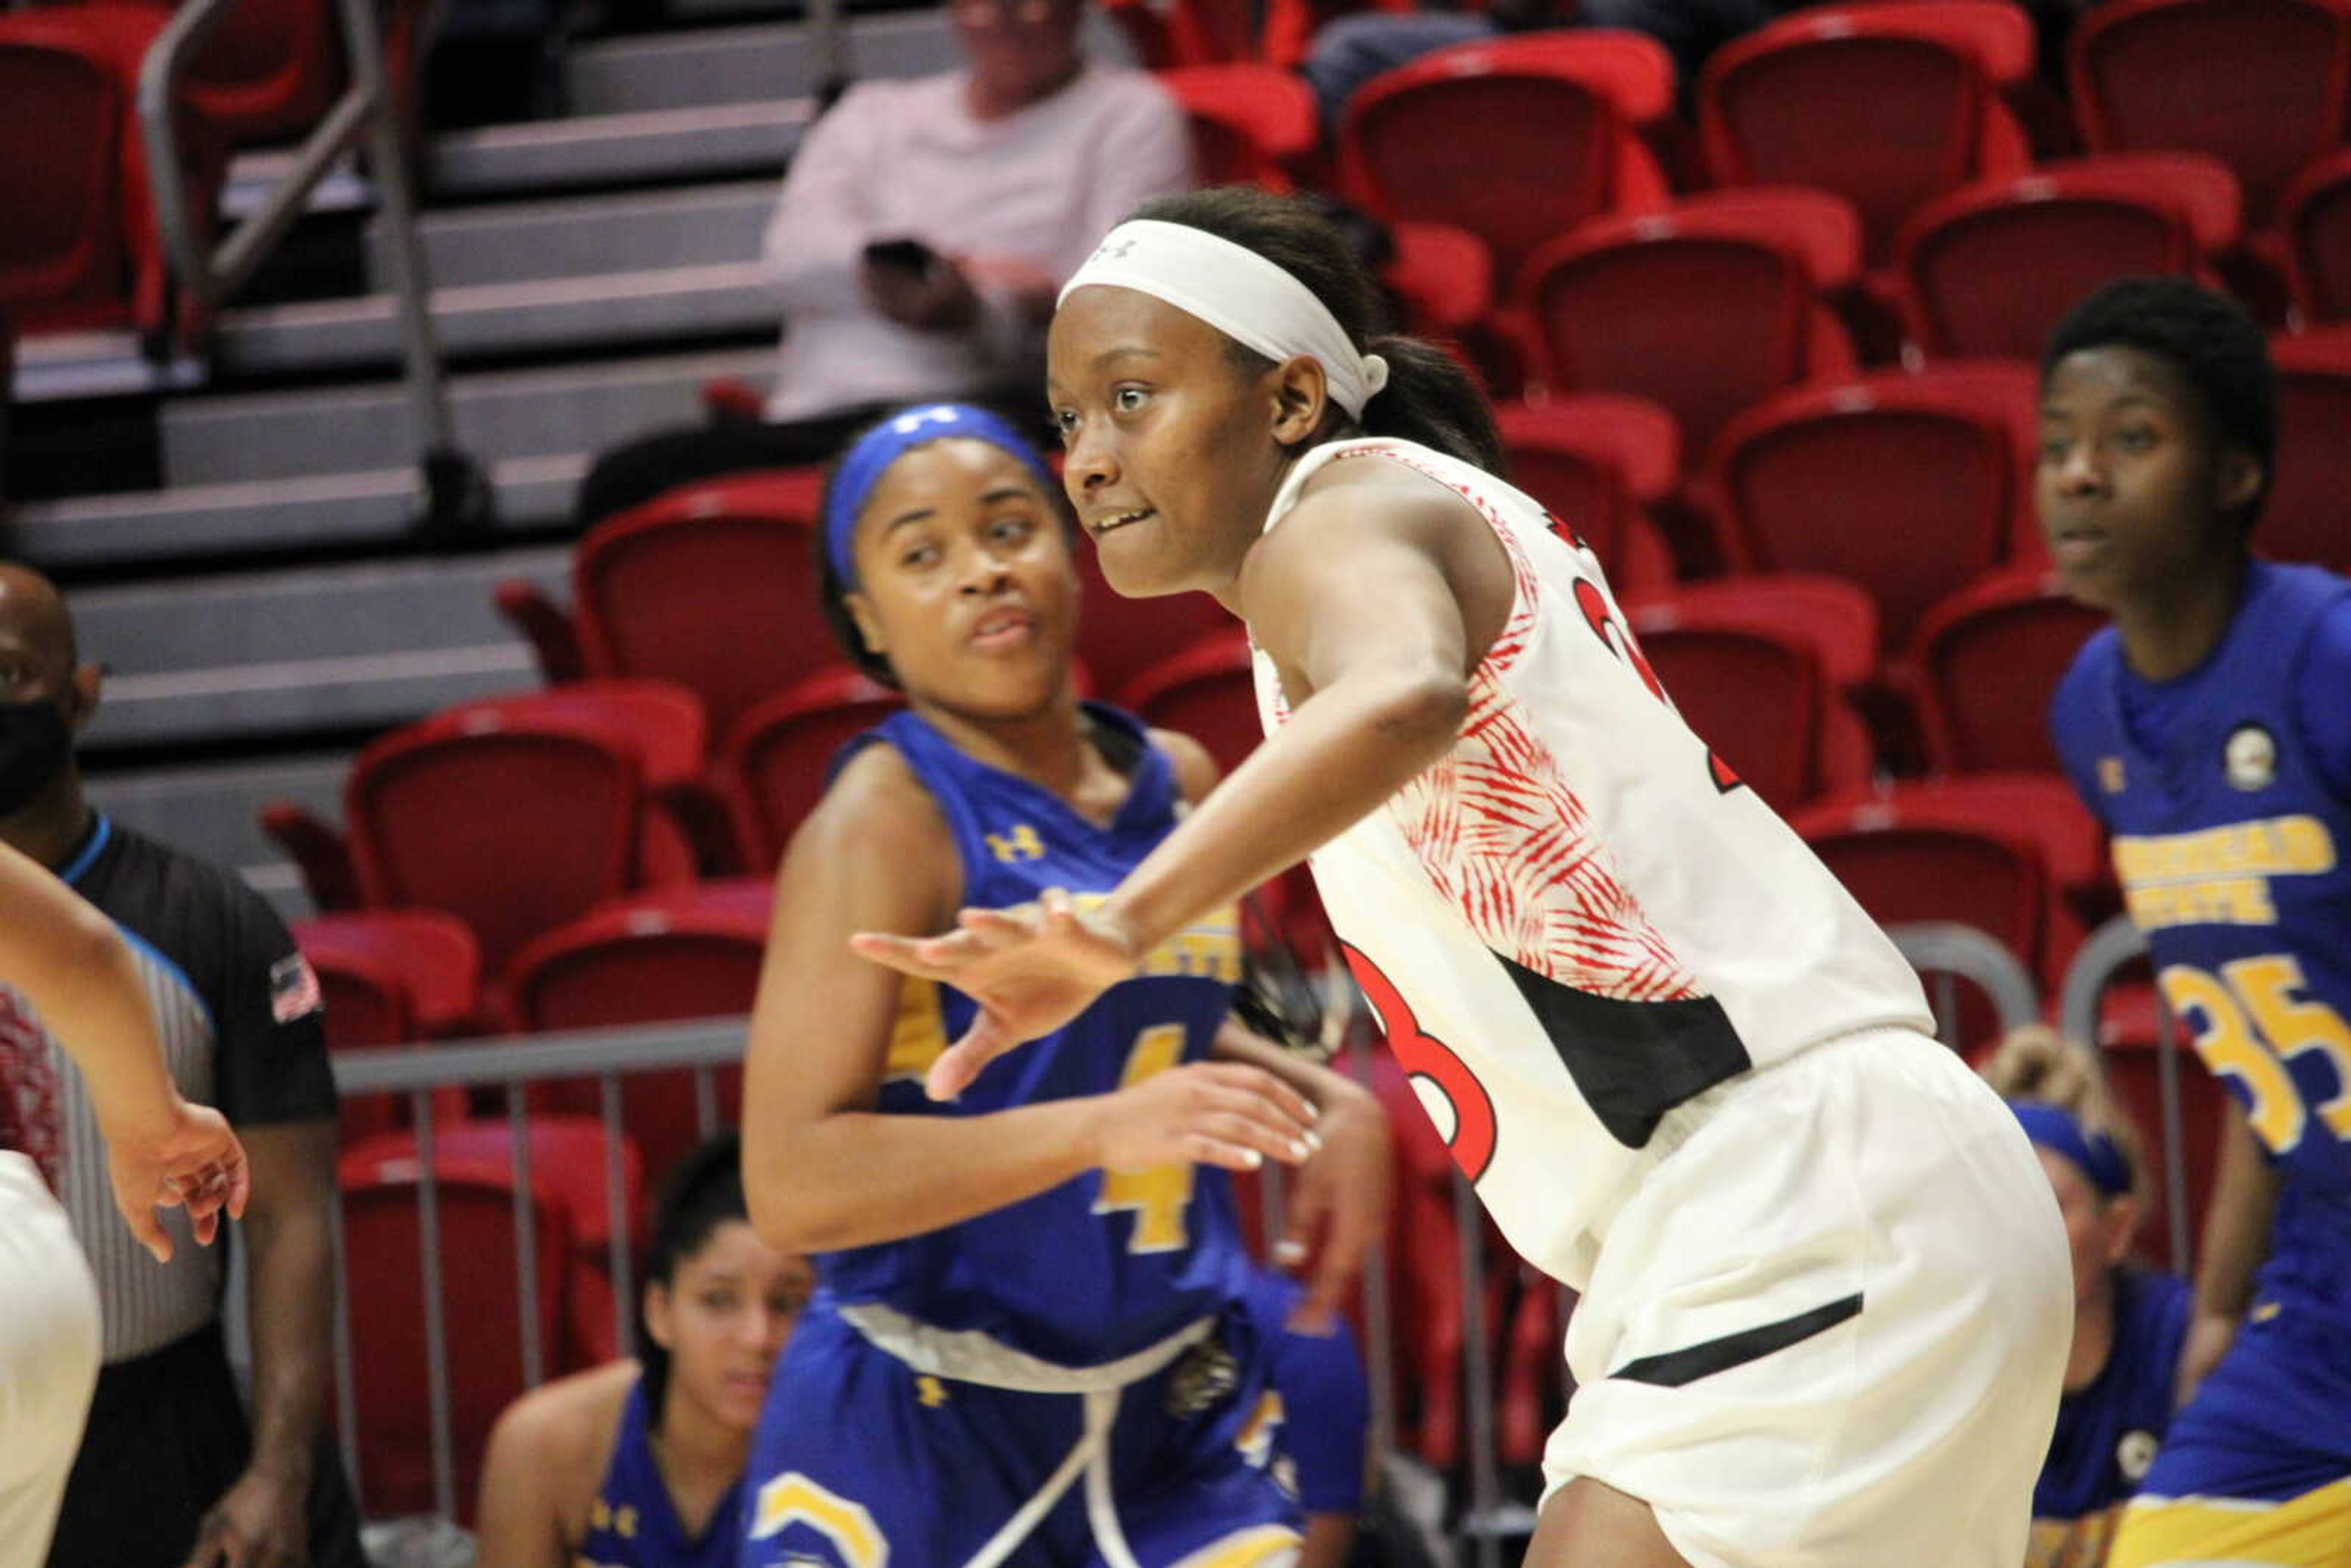 Senior guard Deanay Watson blocks out Morehead State players in the Redhawks' game on Jan. 27. Watson finished the game with a double-double.